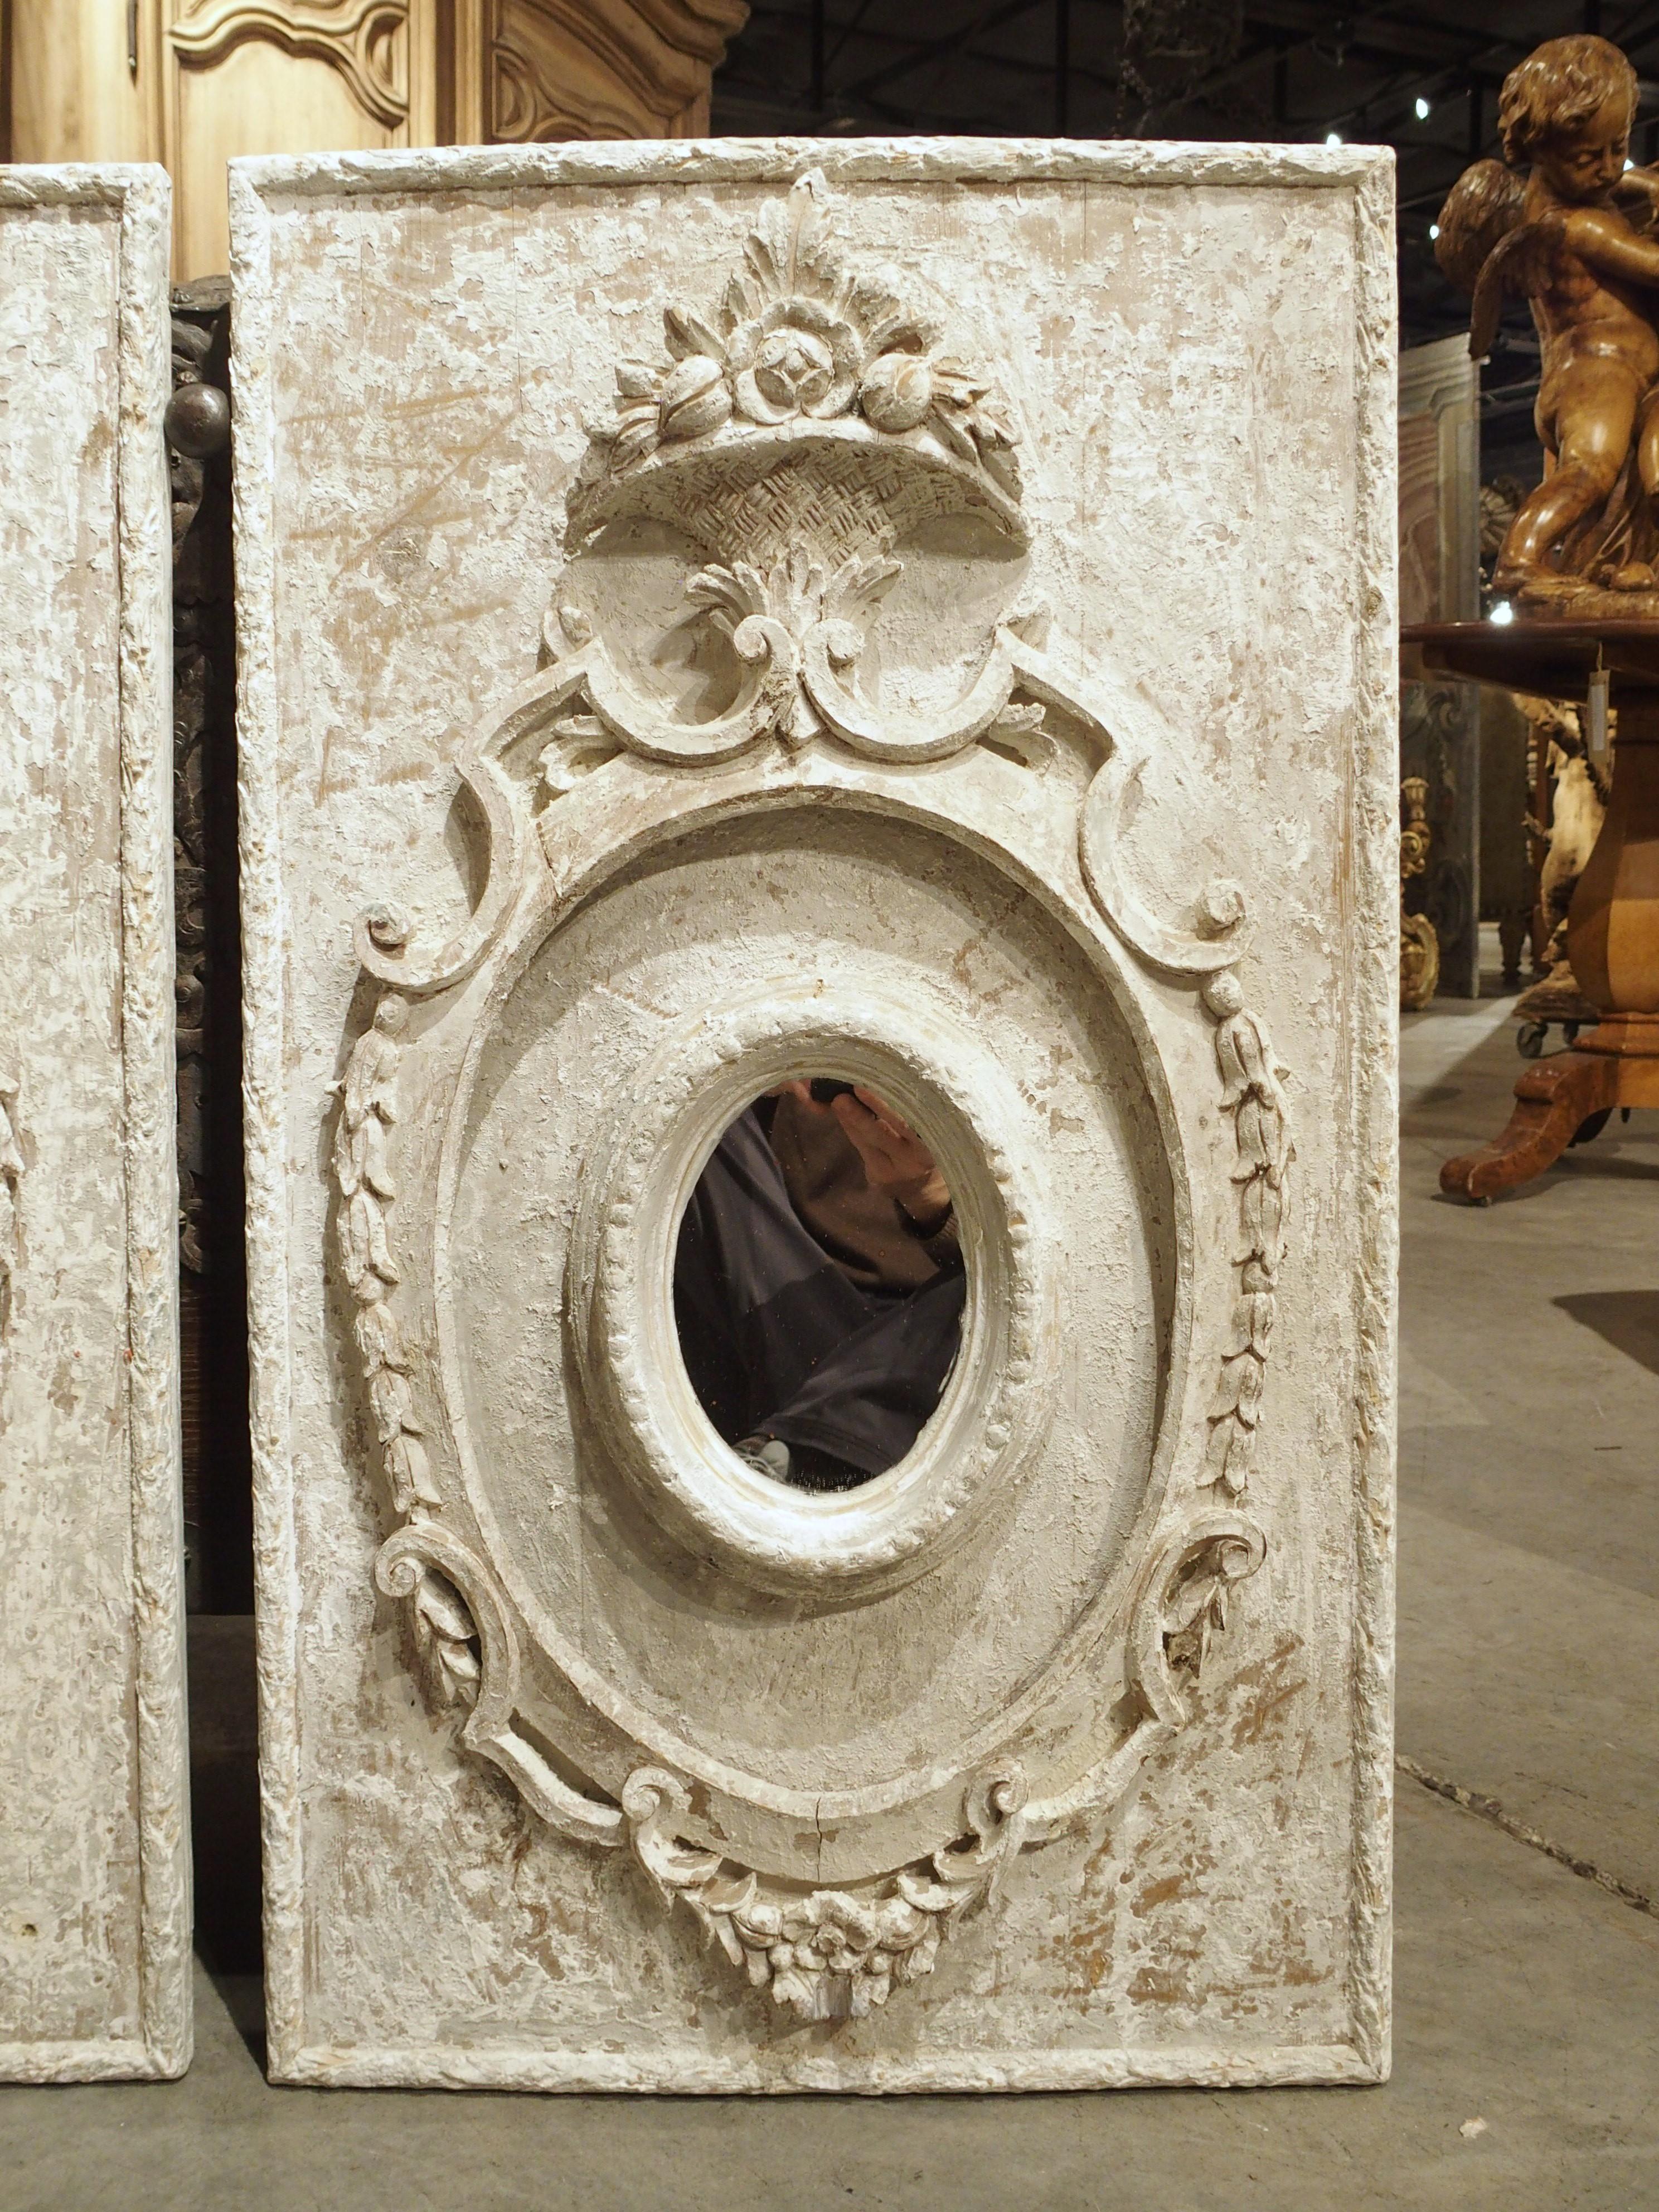 These painted panels were meticulously hand-crafted in Florence, Italy. The panels have been parcel-painted white with a 6 ¼ x 4 ½ oval mirror set inside an open cartouche. Both mirrors are surrounded by acanthus husks, floral swags, and volute